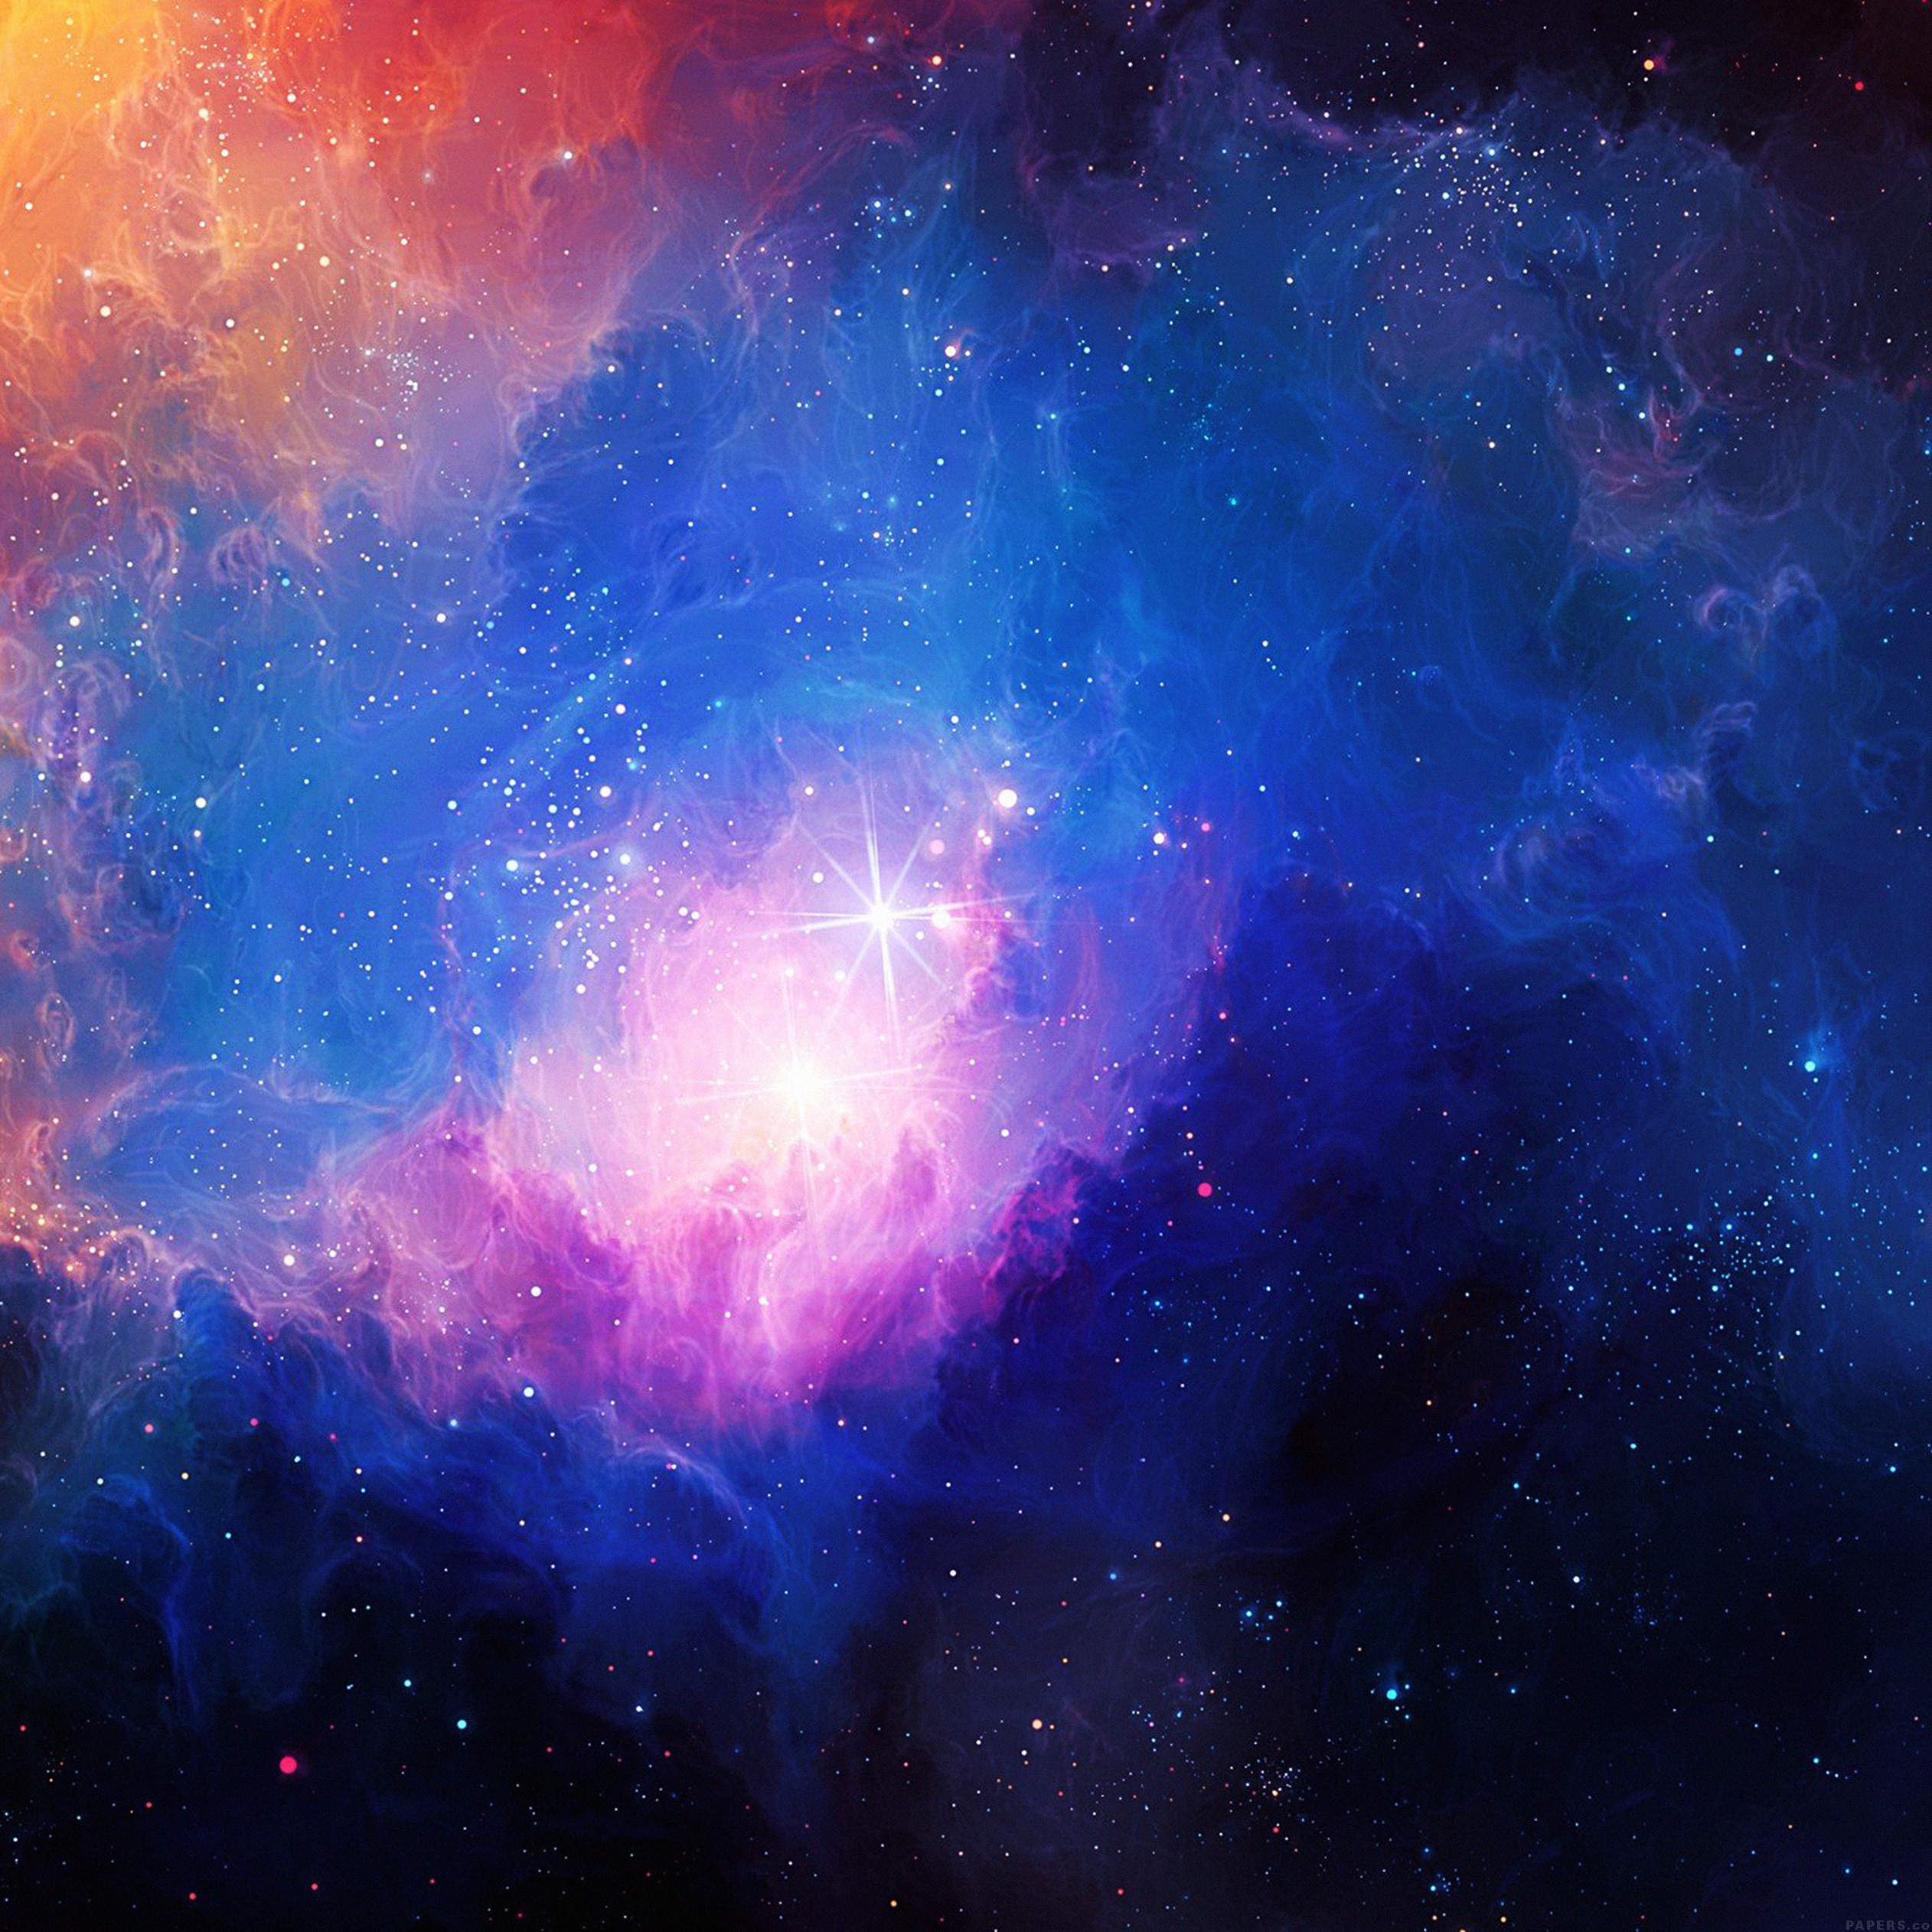 Background Iphone Galaxy Space Cool Photos